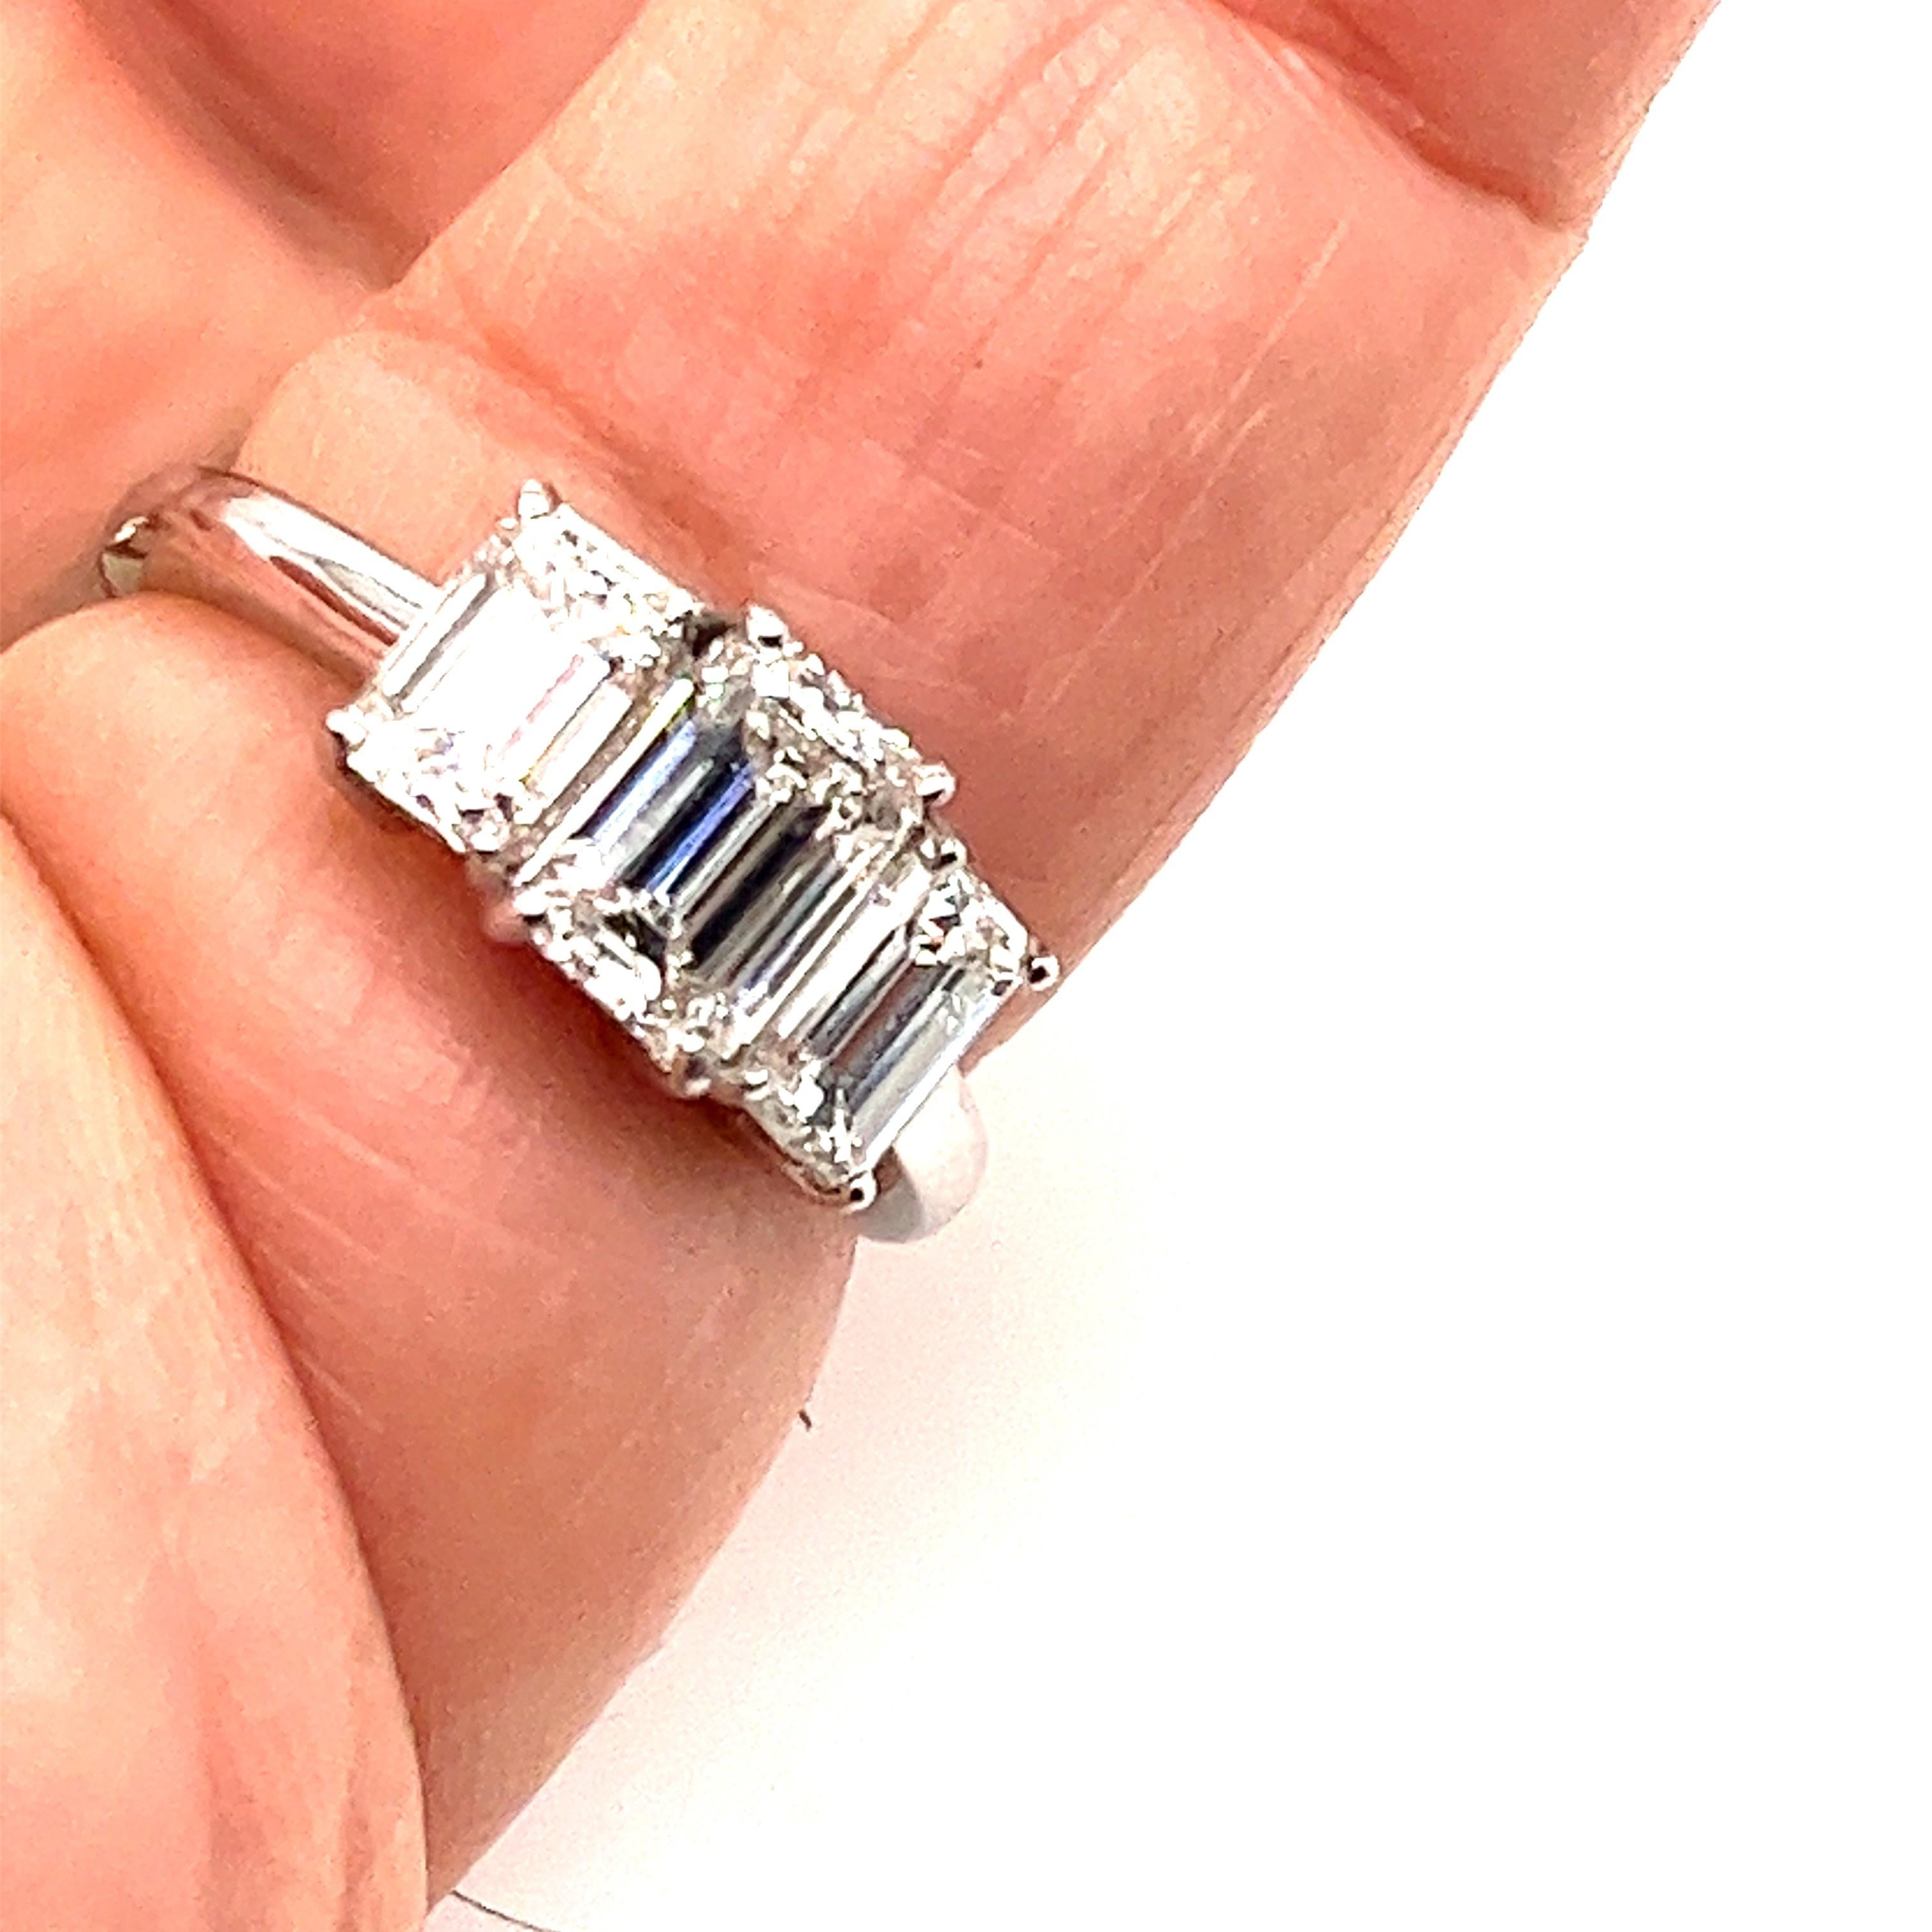 Offered here is an elegant three stones ring, handmade in noble 950 platinum.
Centered with a 1.01 ct natural earth mined Emerald cut diamond flanked with a natural earth mined Emerald cut diamond on each side of the shank, side stones weight is